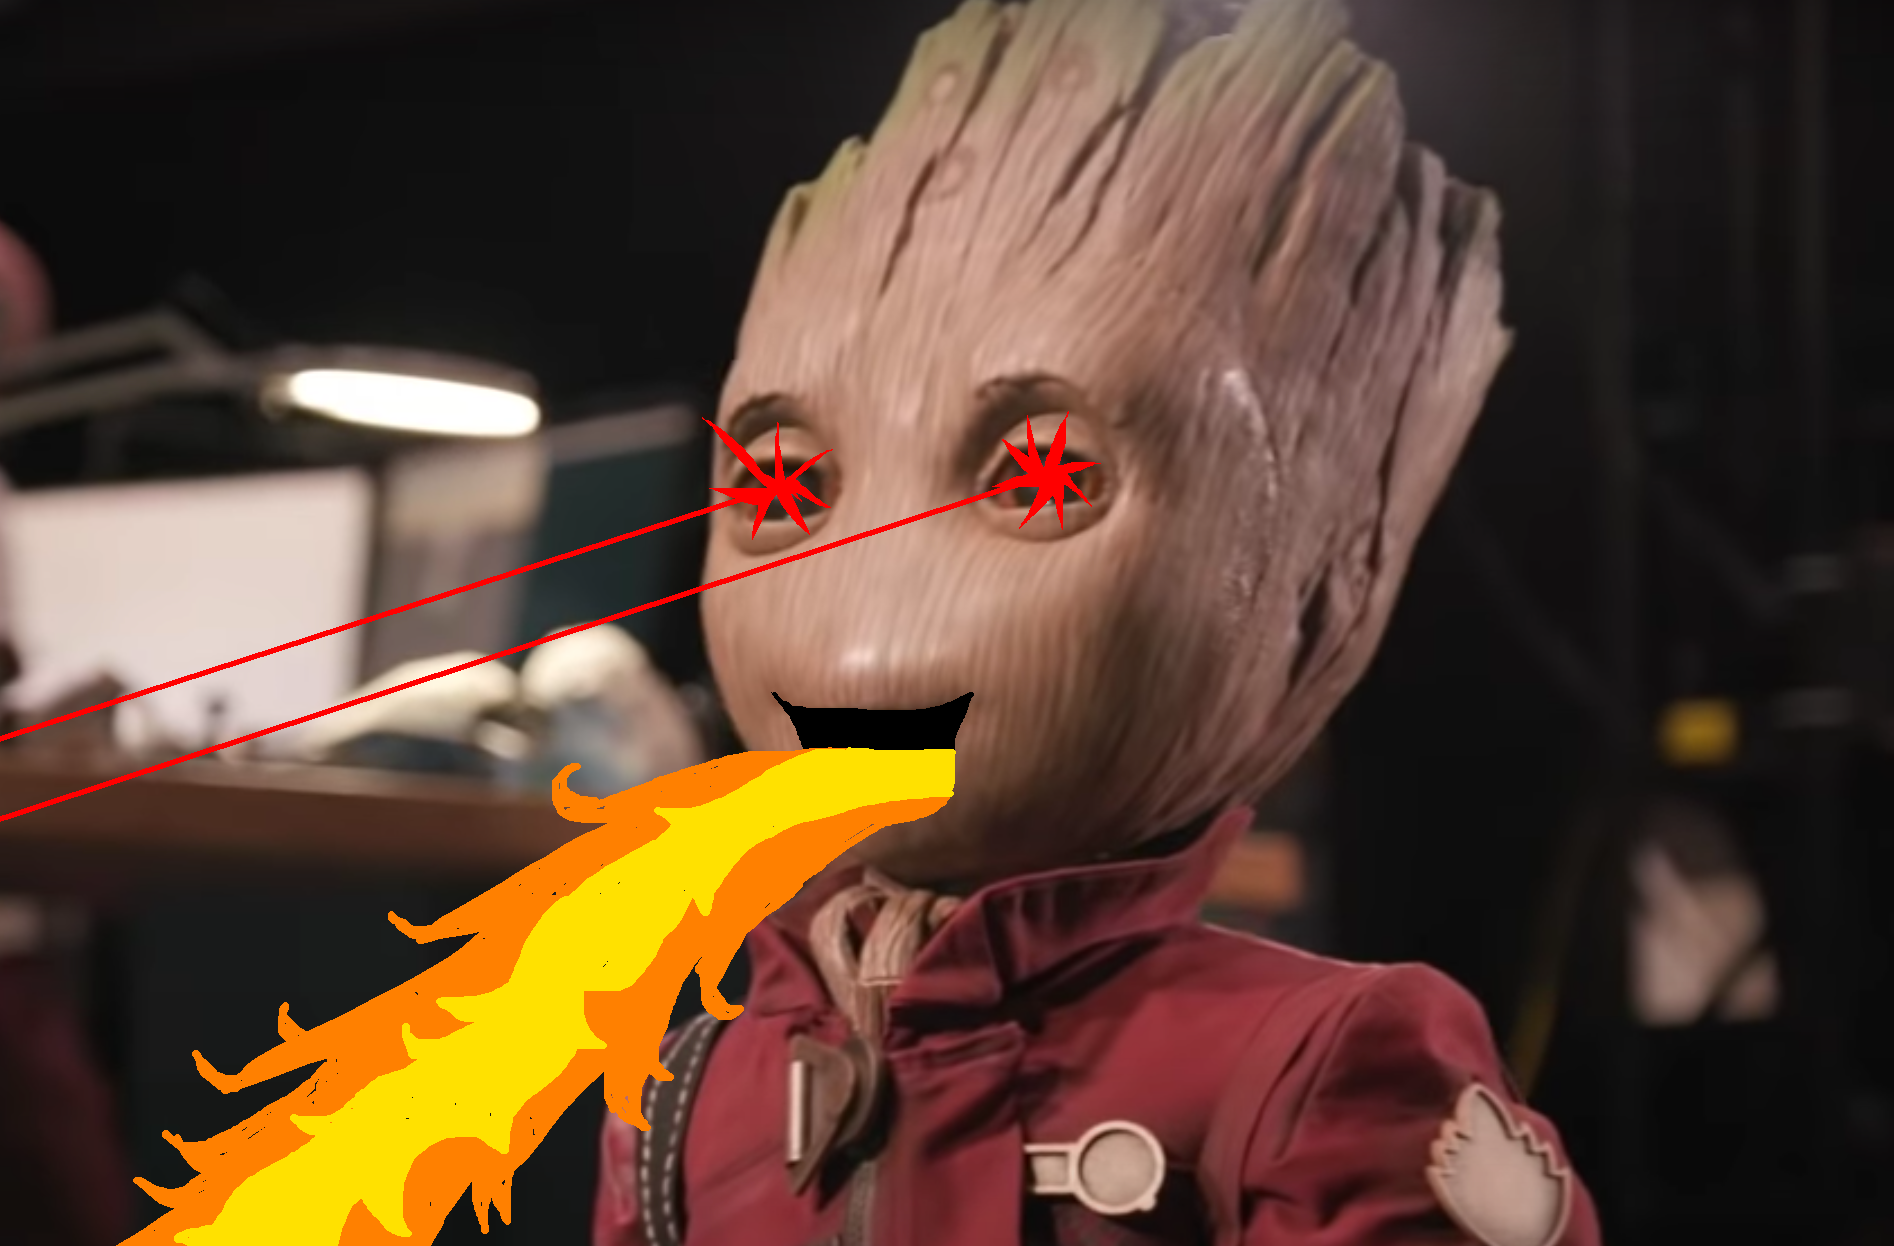 The Groot animatronic depicted with lasers for eyes and belching fire.